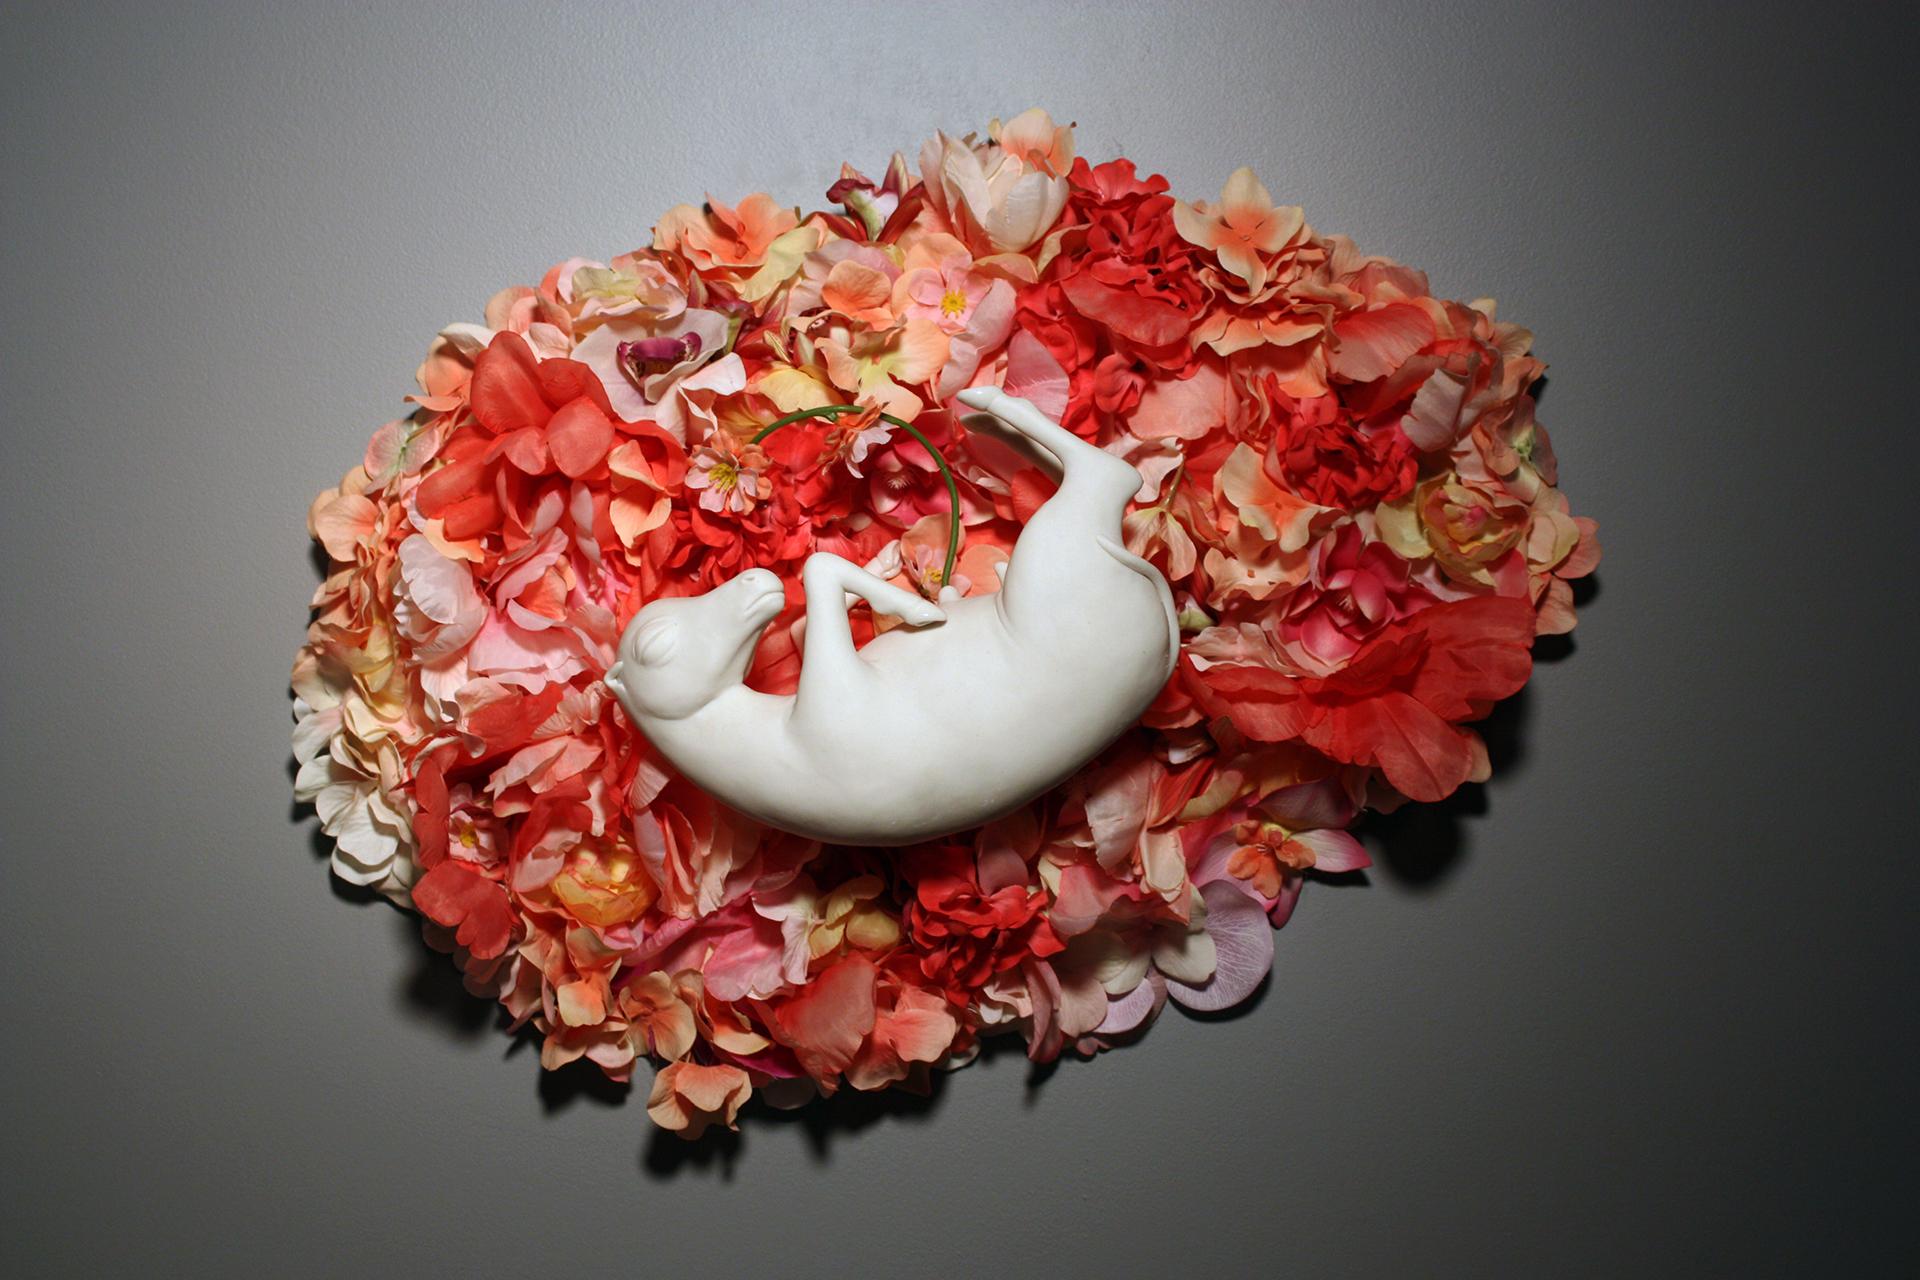 porcelain horse sculpture in pink flowers "Womb" by Bethany Krull